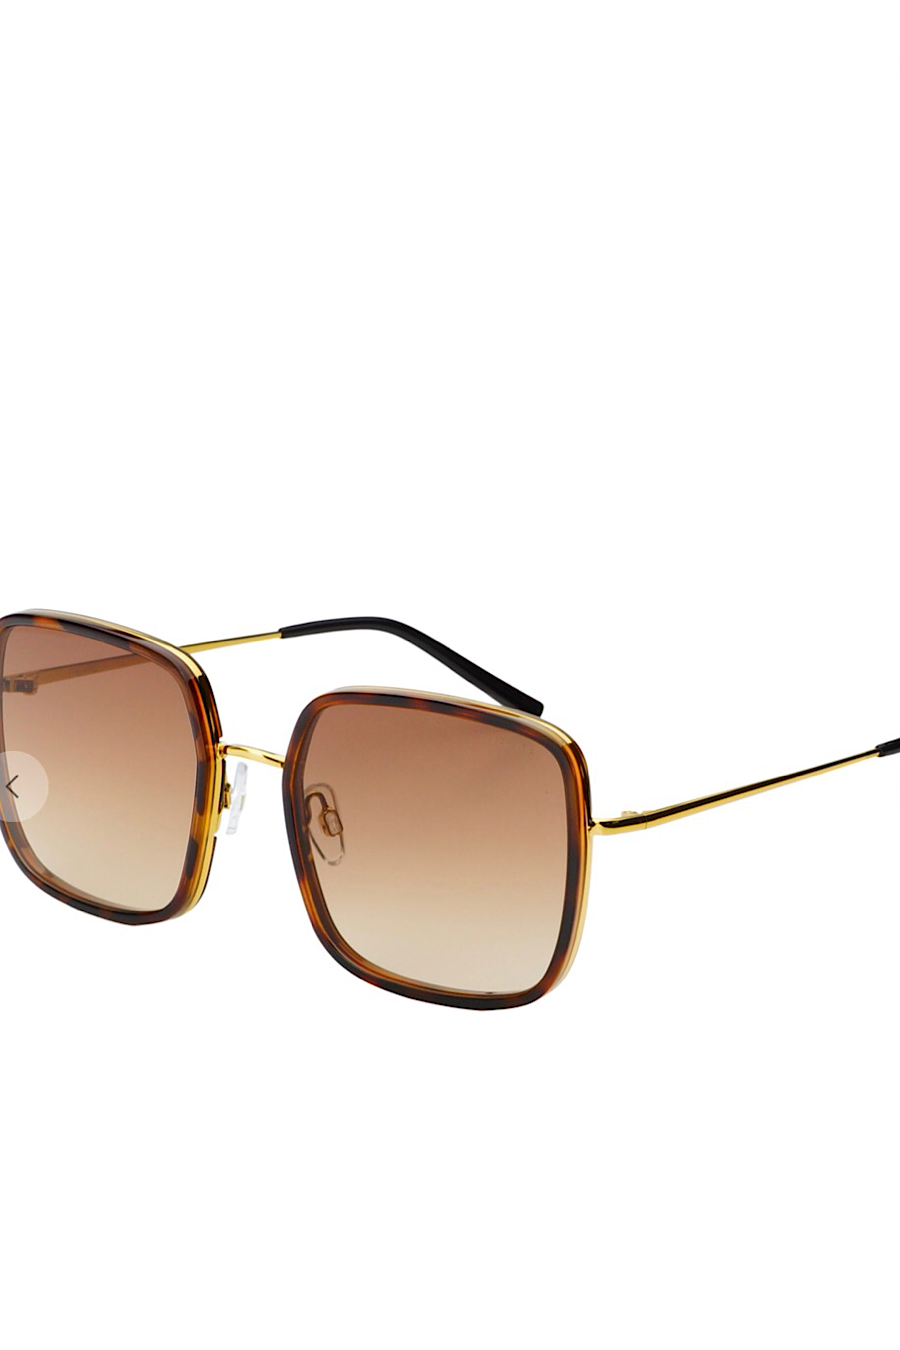 Freyrs Cosmo Square Sunglasses Brown